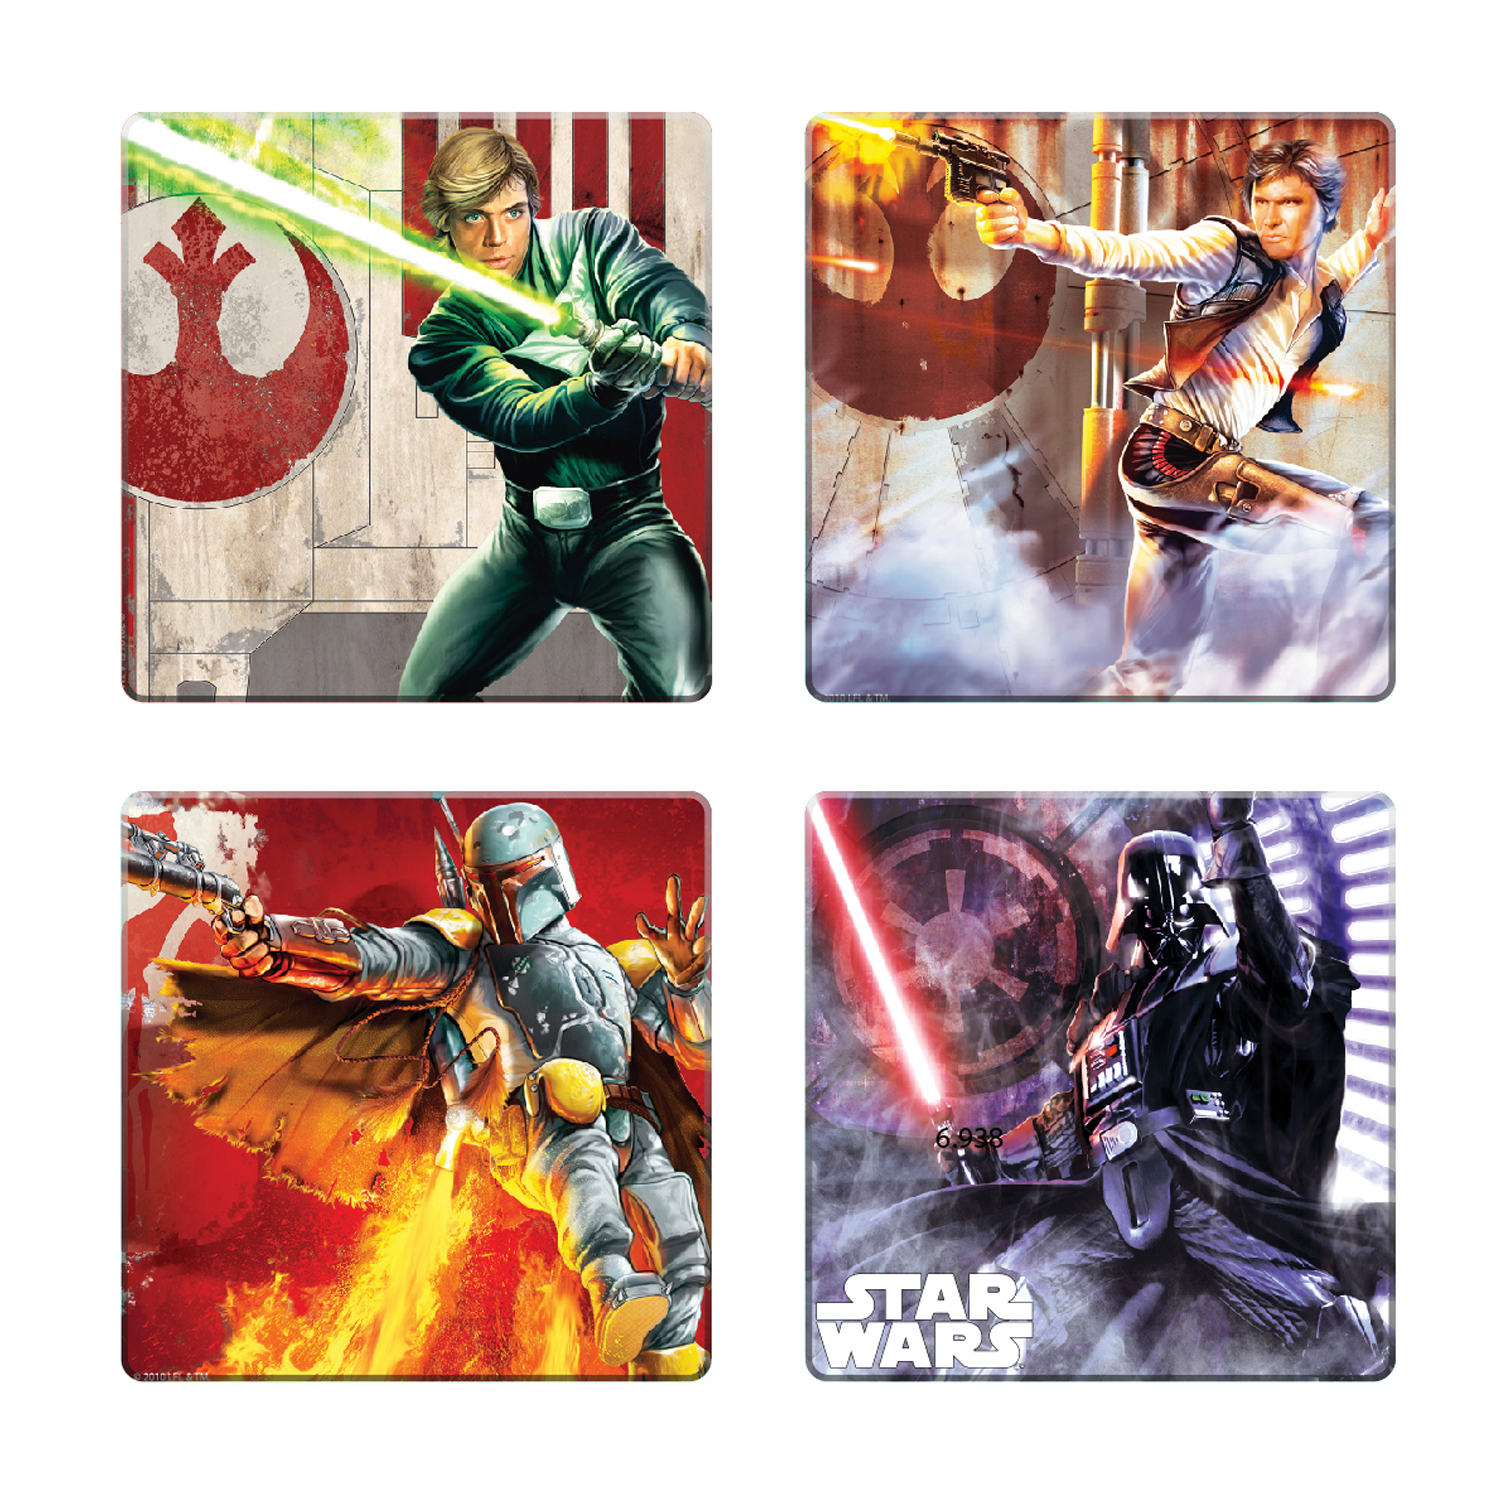 Star Wars Coasters with Tin Box - Entertainment Earth